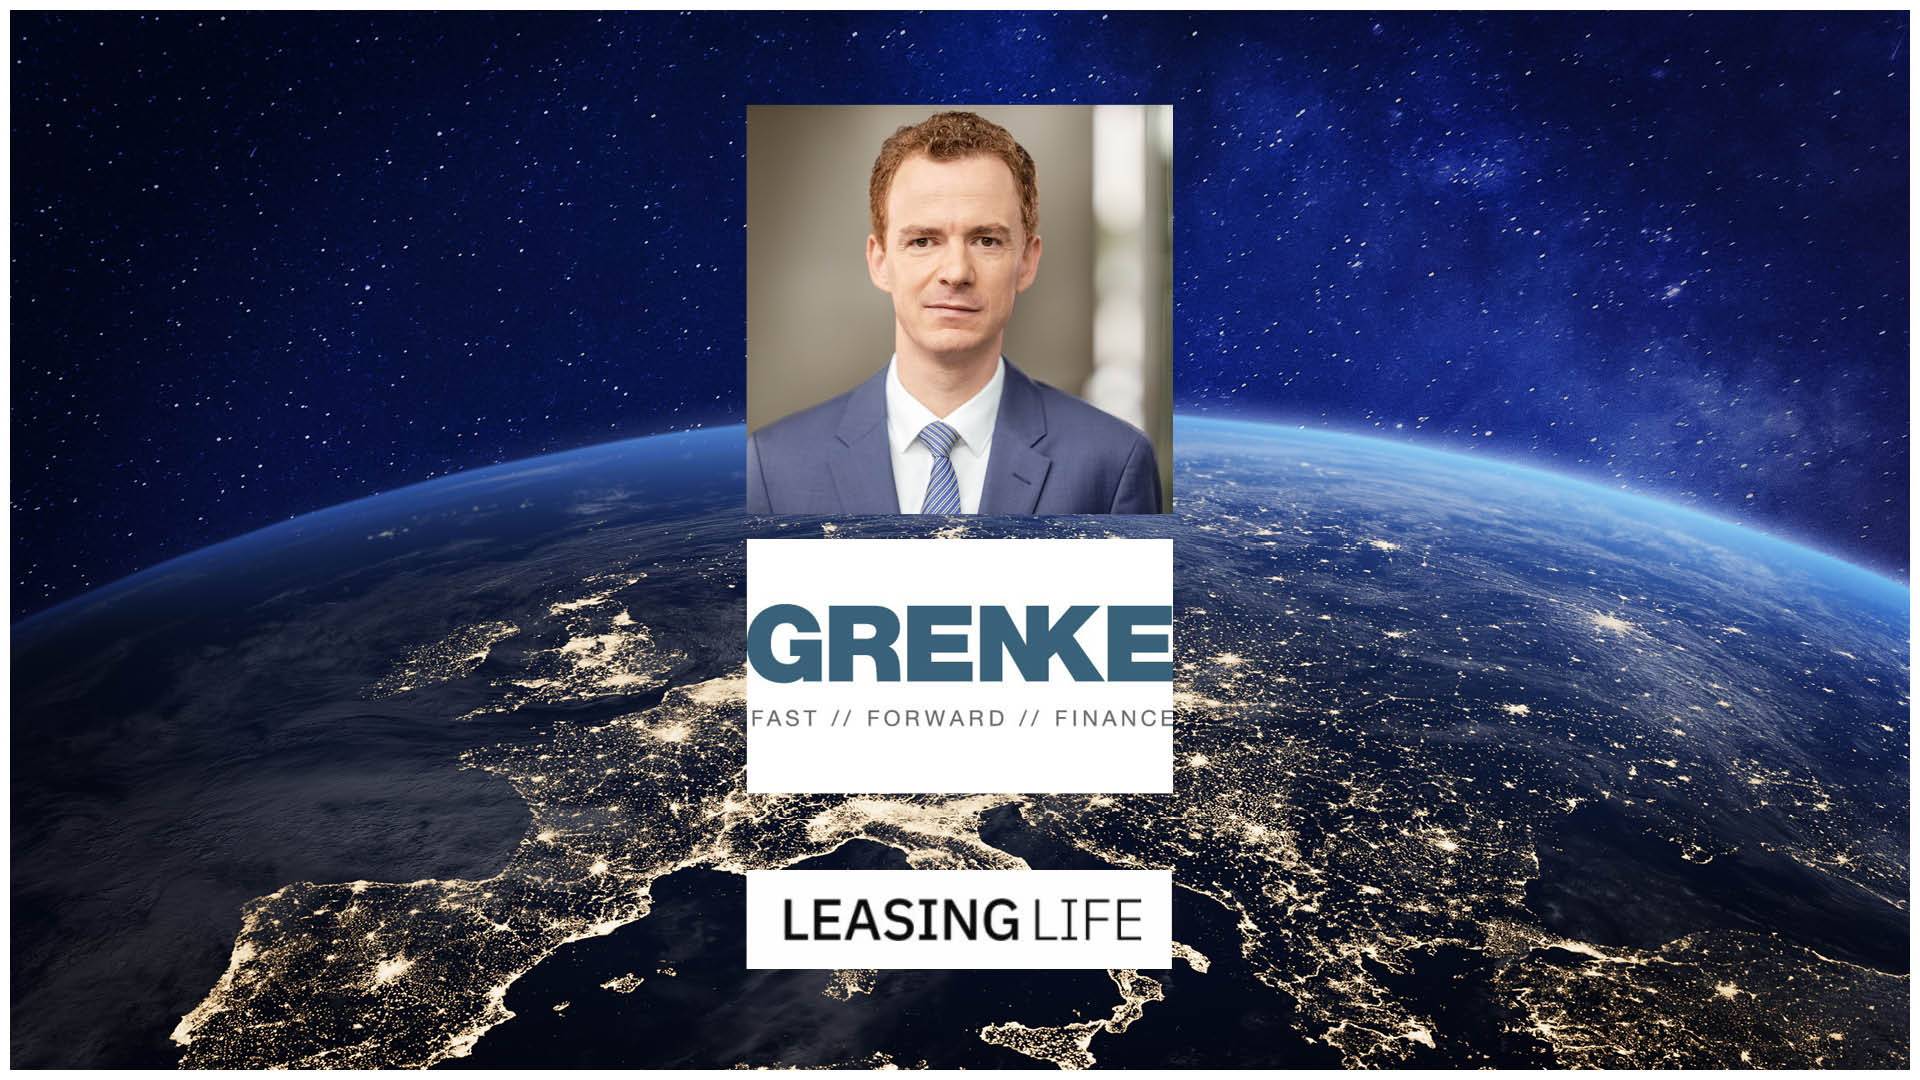 Sebastian Hirsch to become deputy chair of the board of directors of Grenke AG